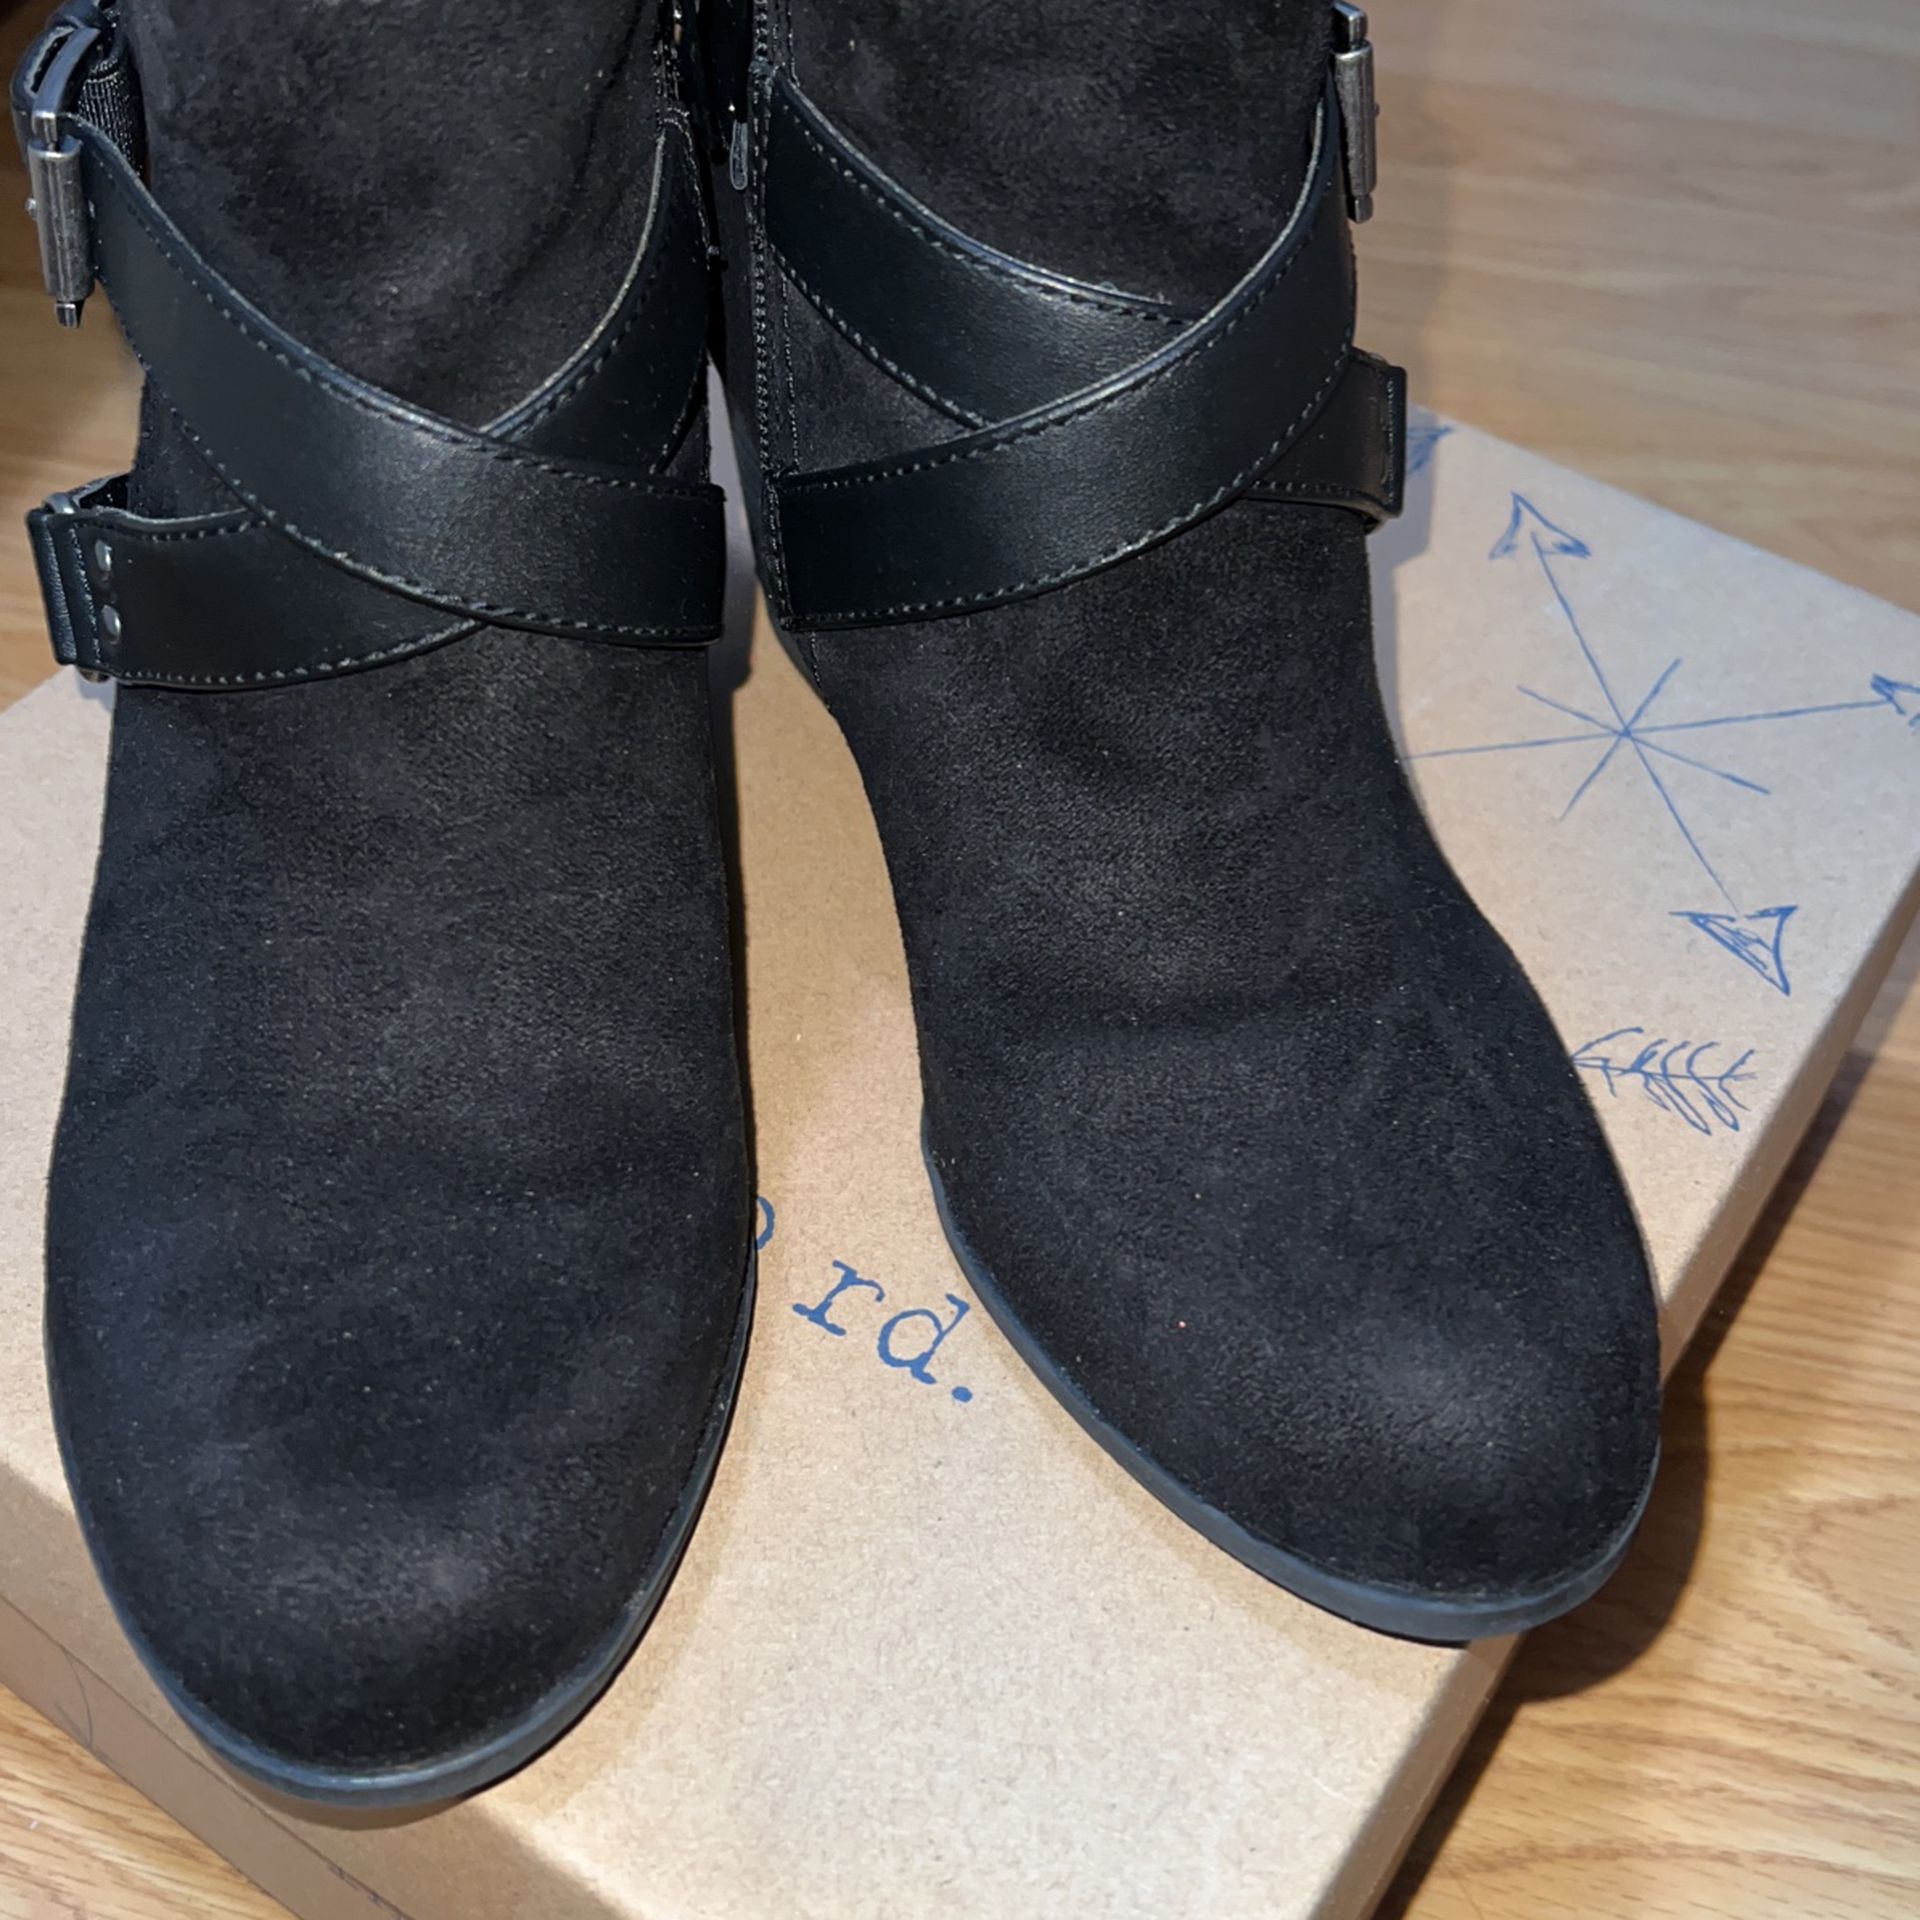 Black Ankle Boots With Zipper. $15